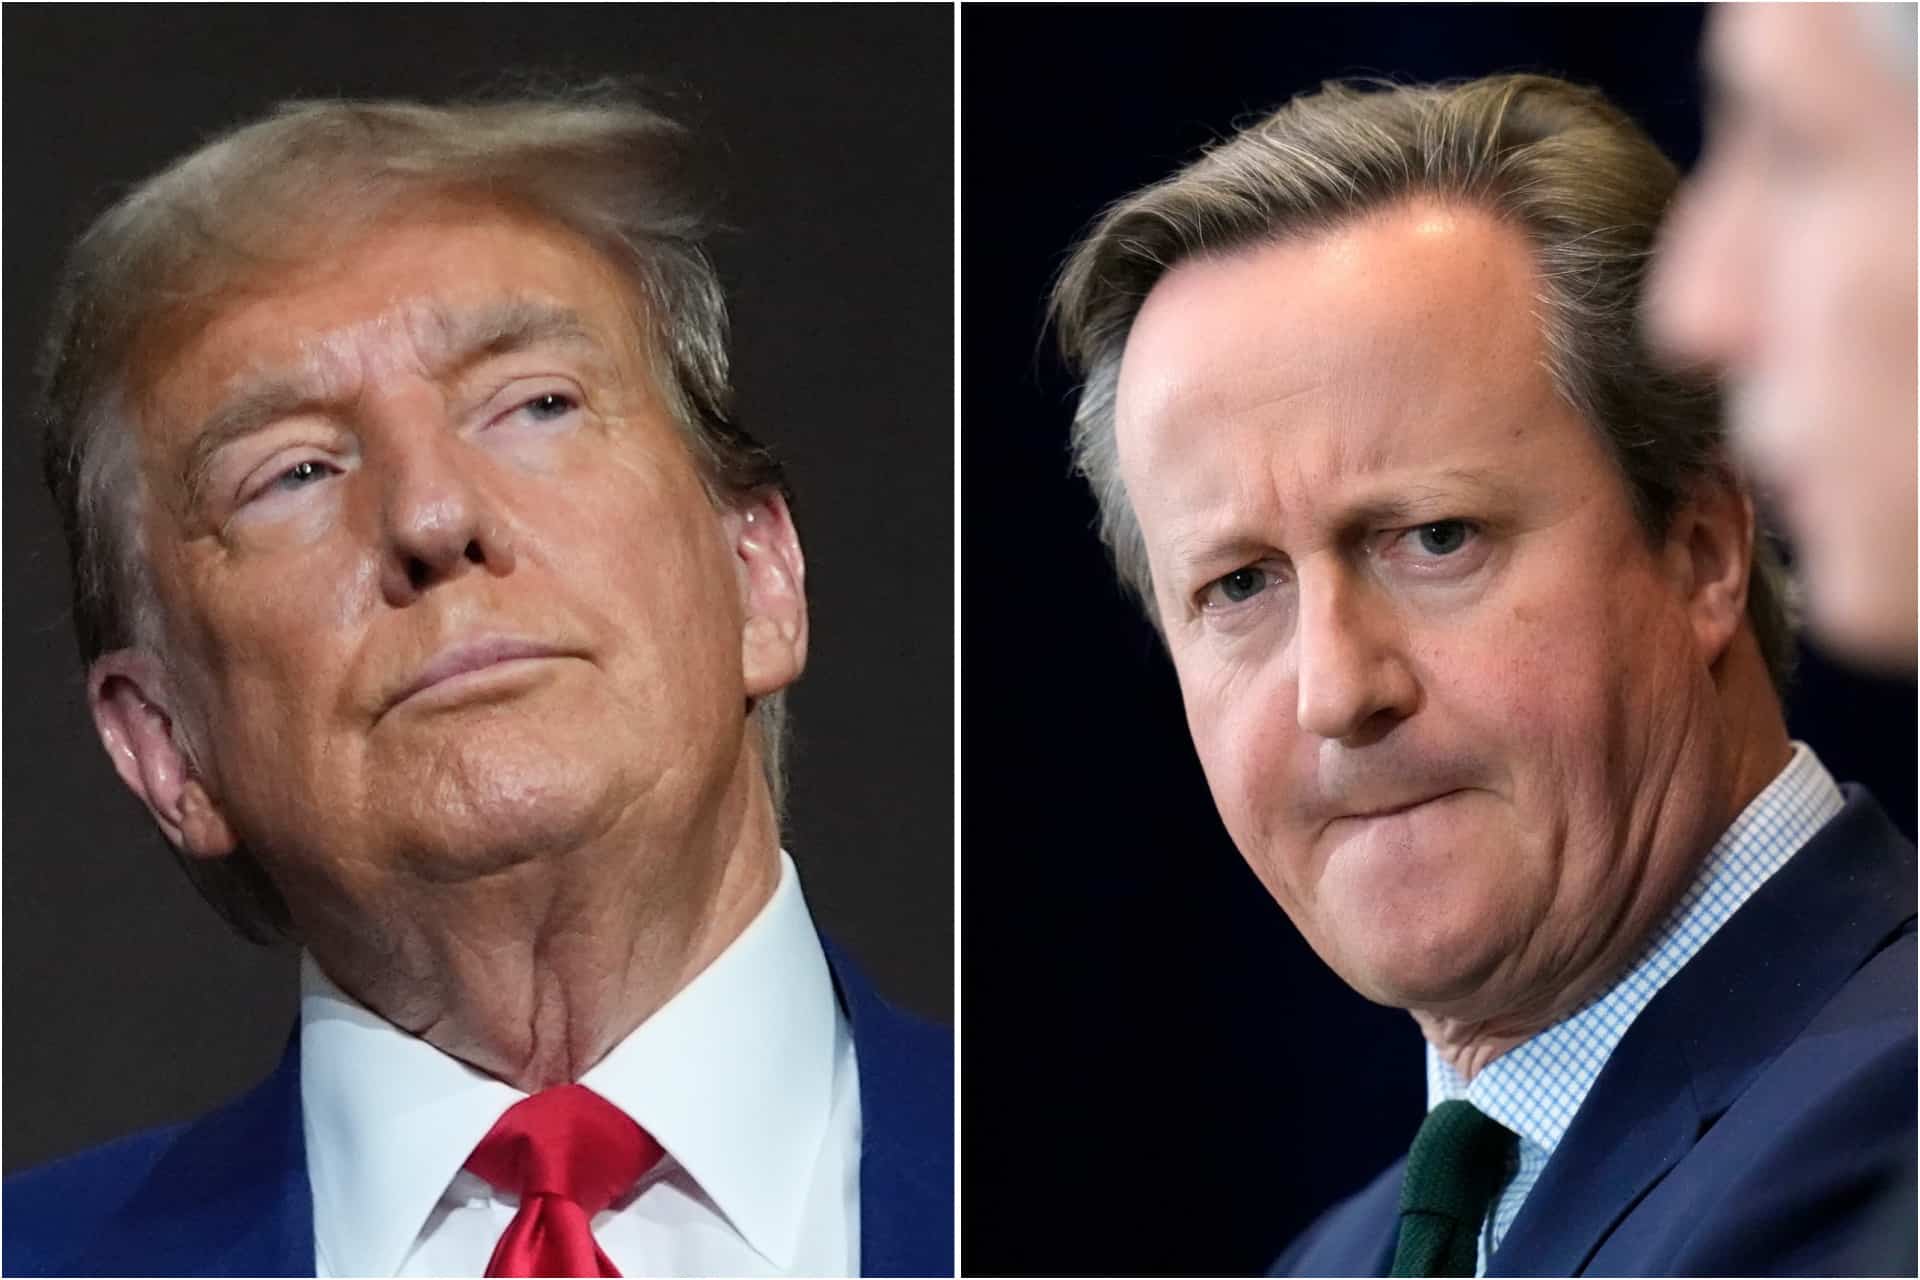 Lord Cameron meets with Donald Trump